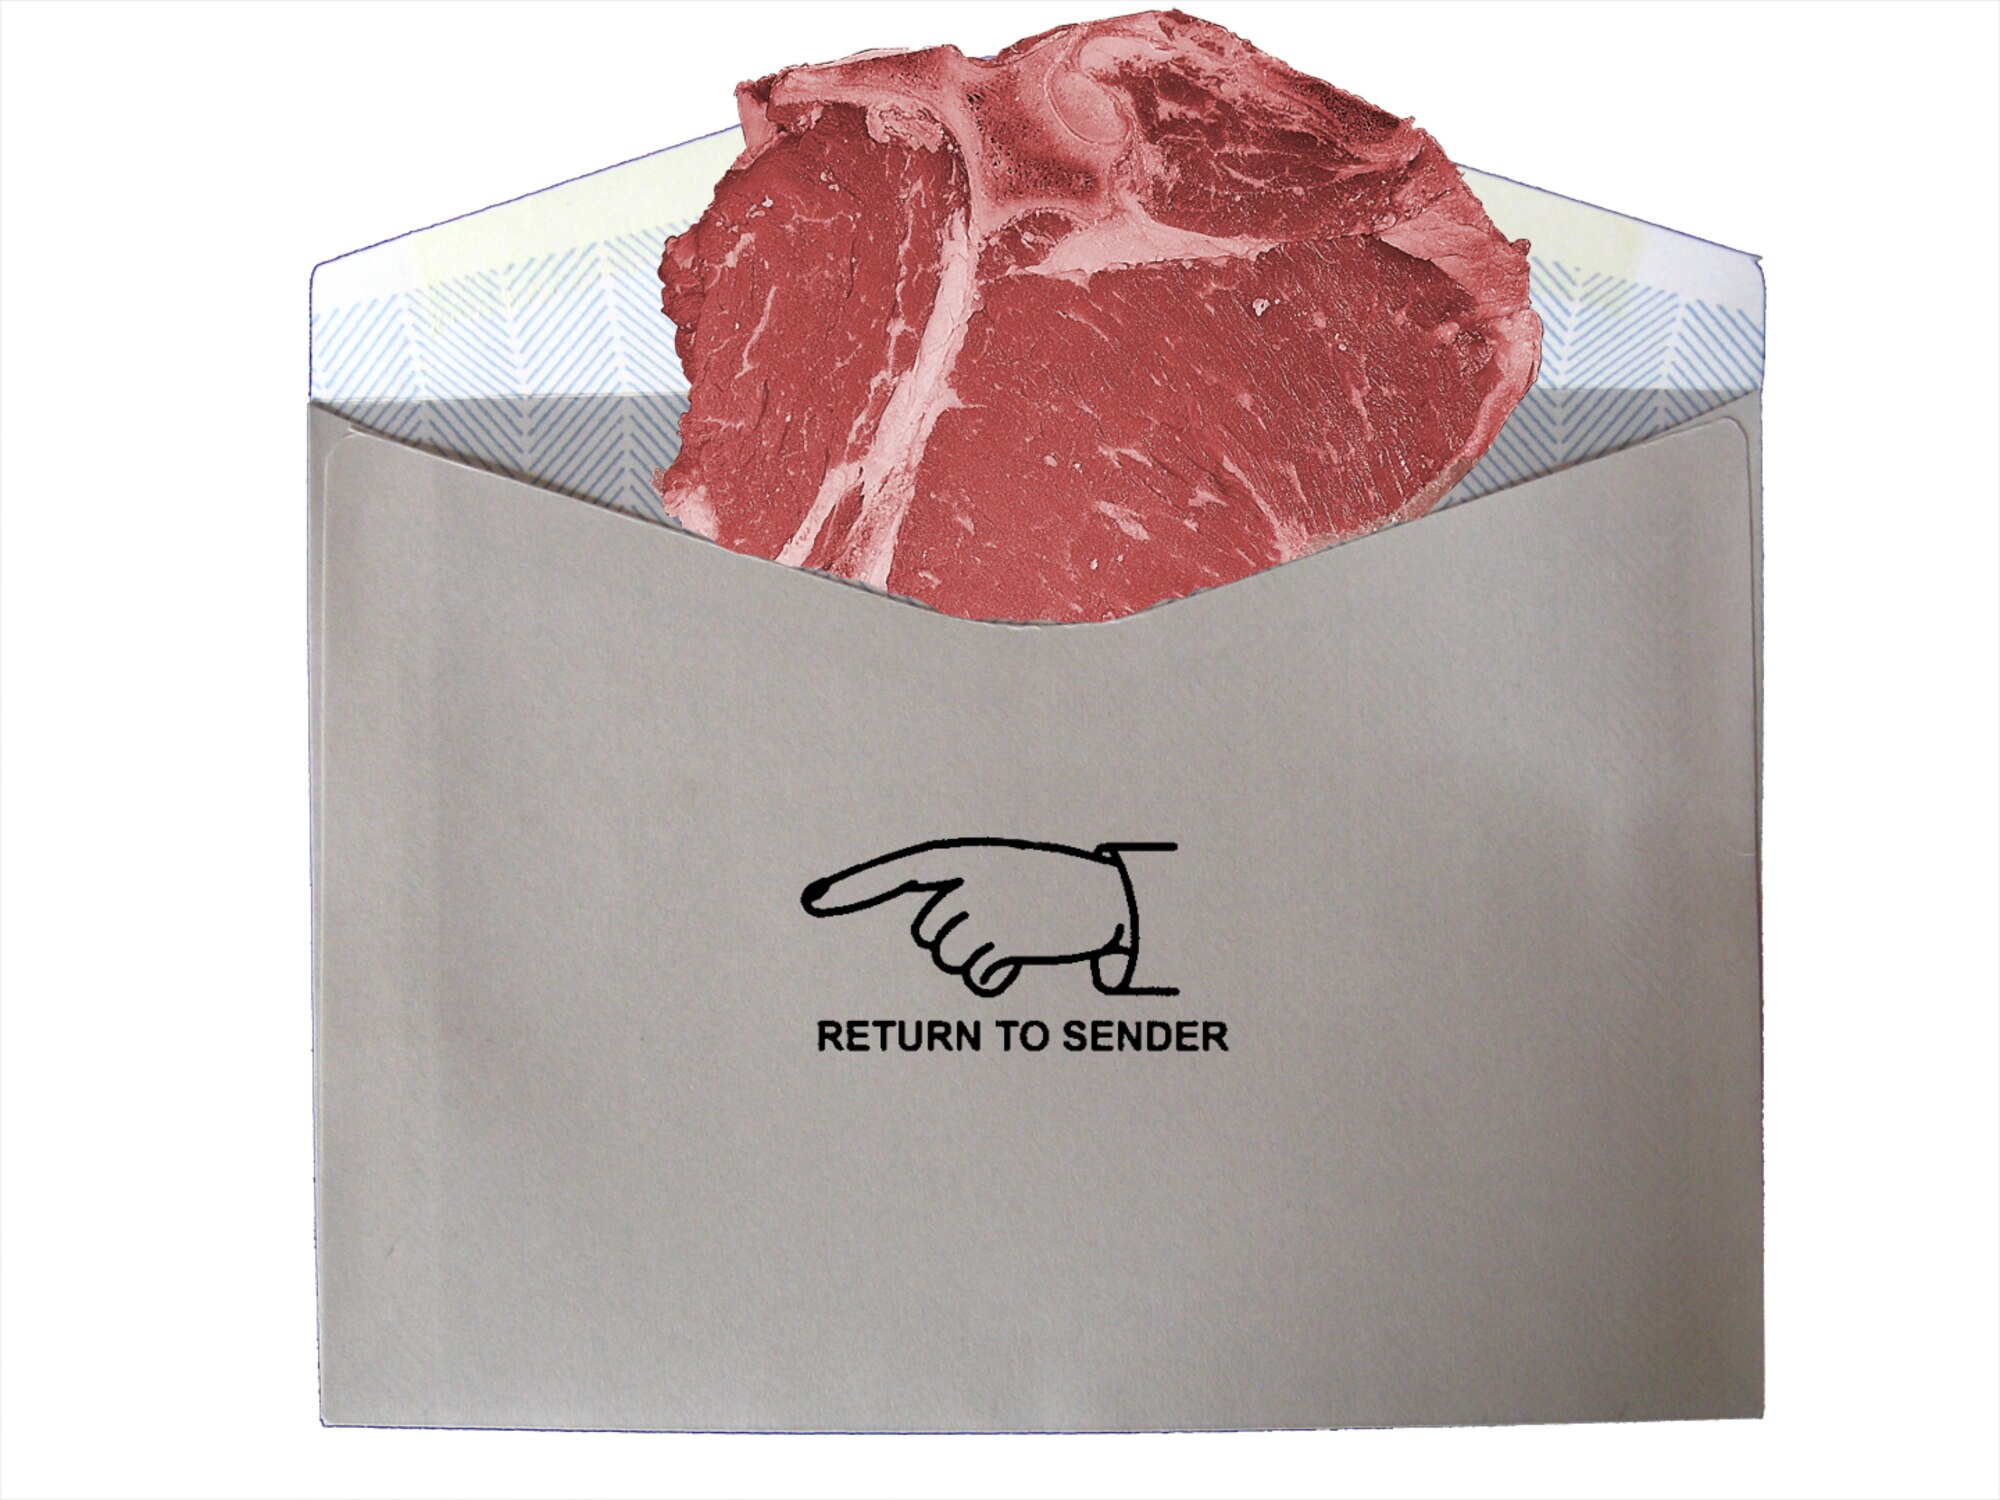 The U.S. Department of Agriculture has a beef with sending red meats and sausage into the U.S. without proper approval.(Graphic by Airman 1st Class T.J. Fleischmann)